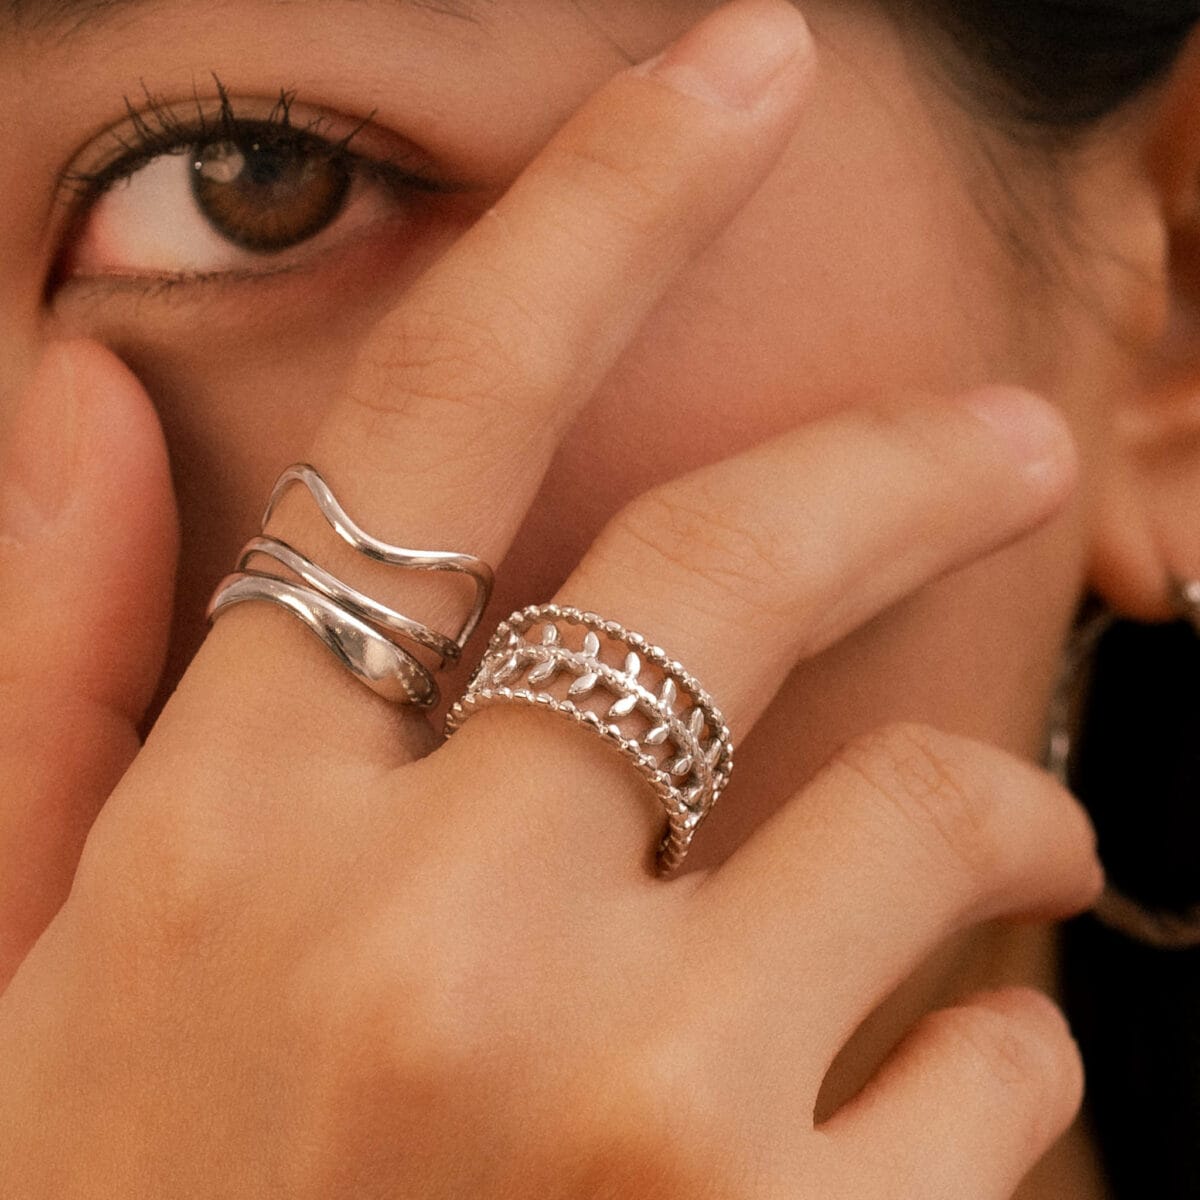 https://m.clubbella.co/product/eternal-foliage-silver-ring/ Aura Spiral and Eternal Foliage Silver RIng (e2)